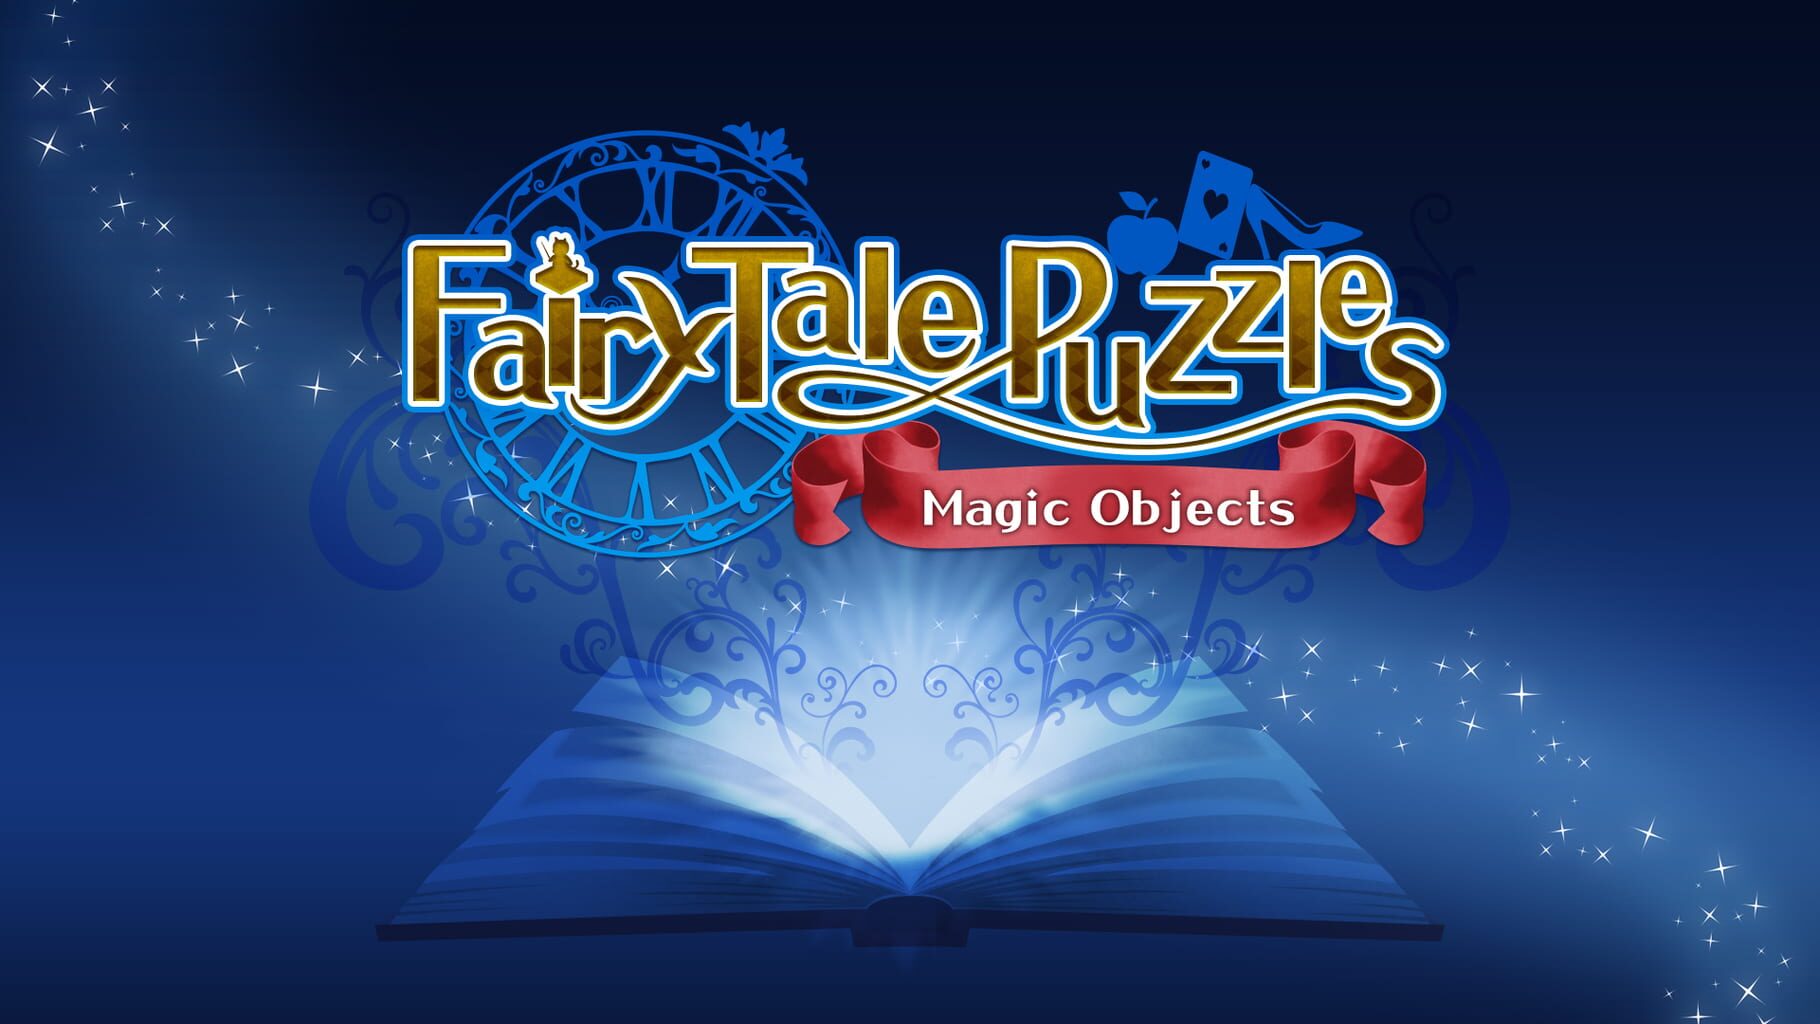 Fairy Tale Puzzles: Magic Objects artwork